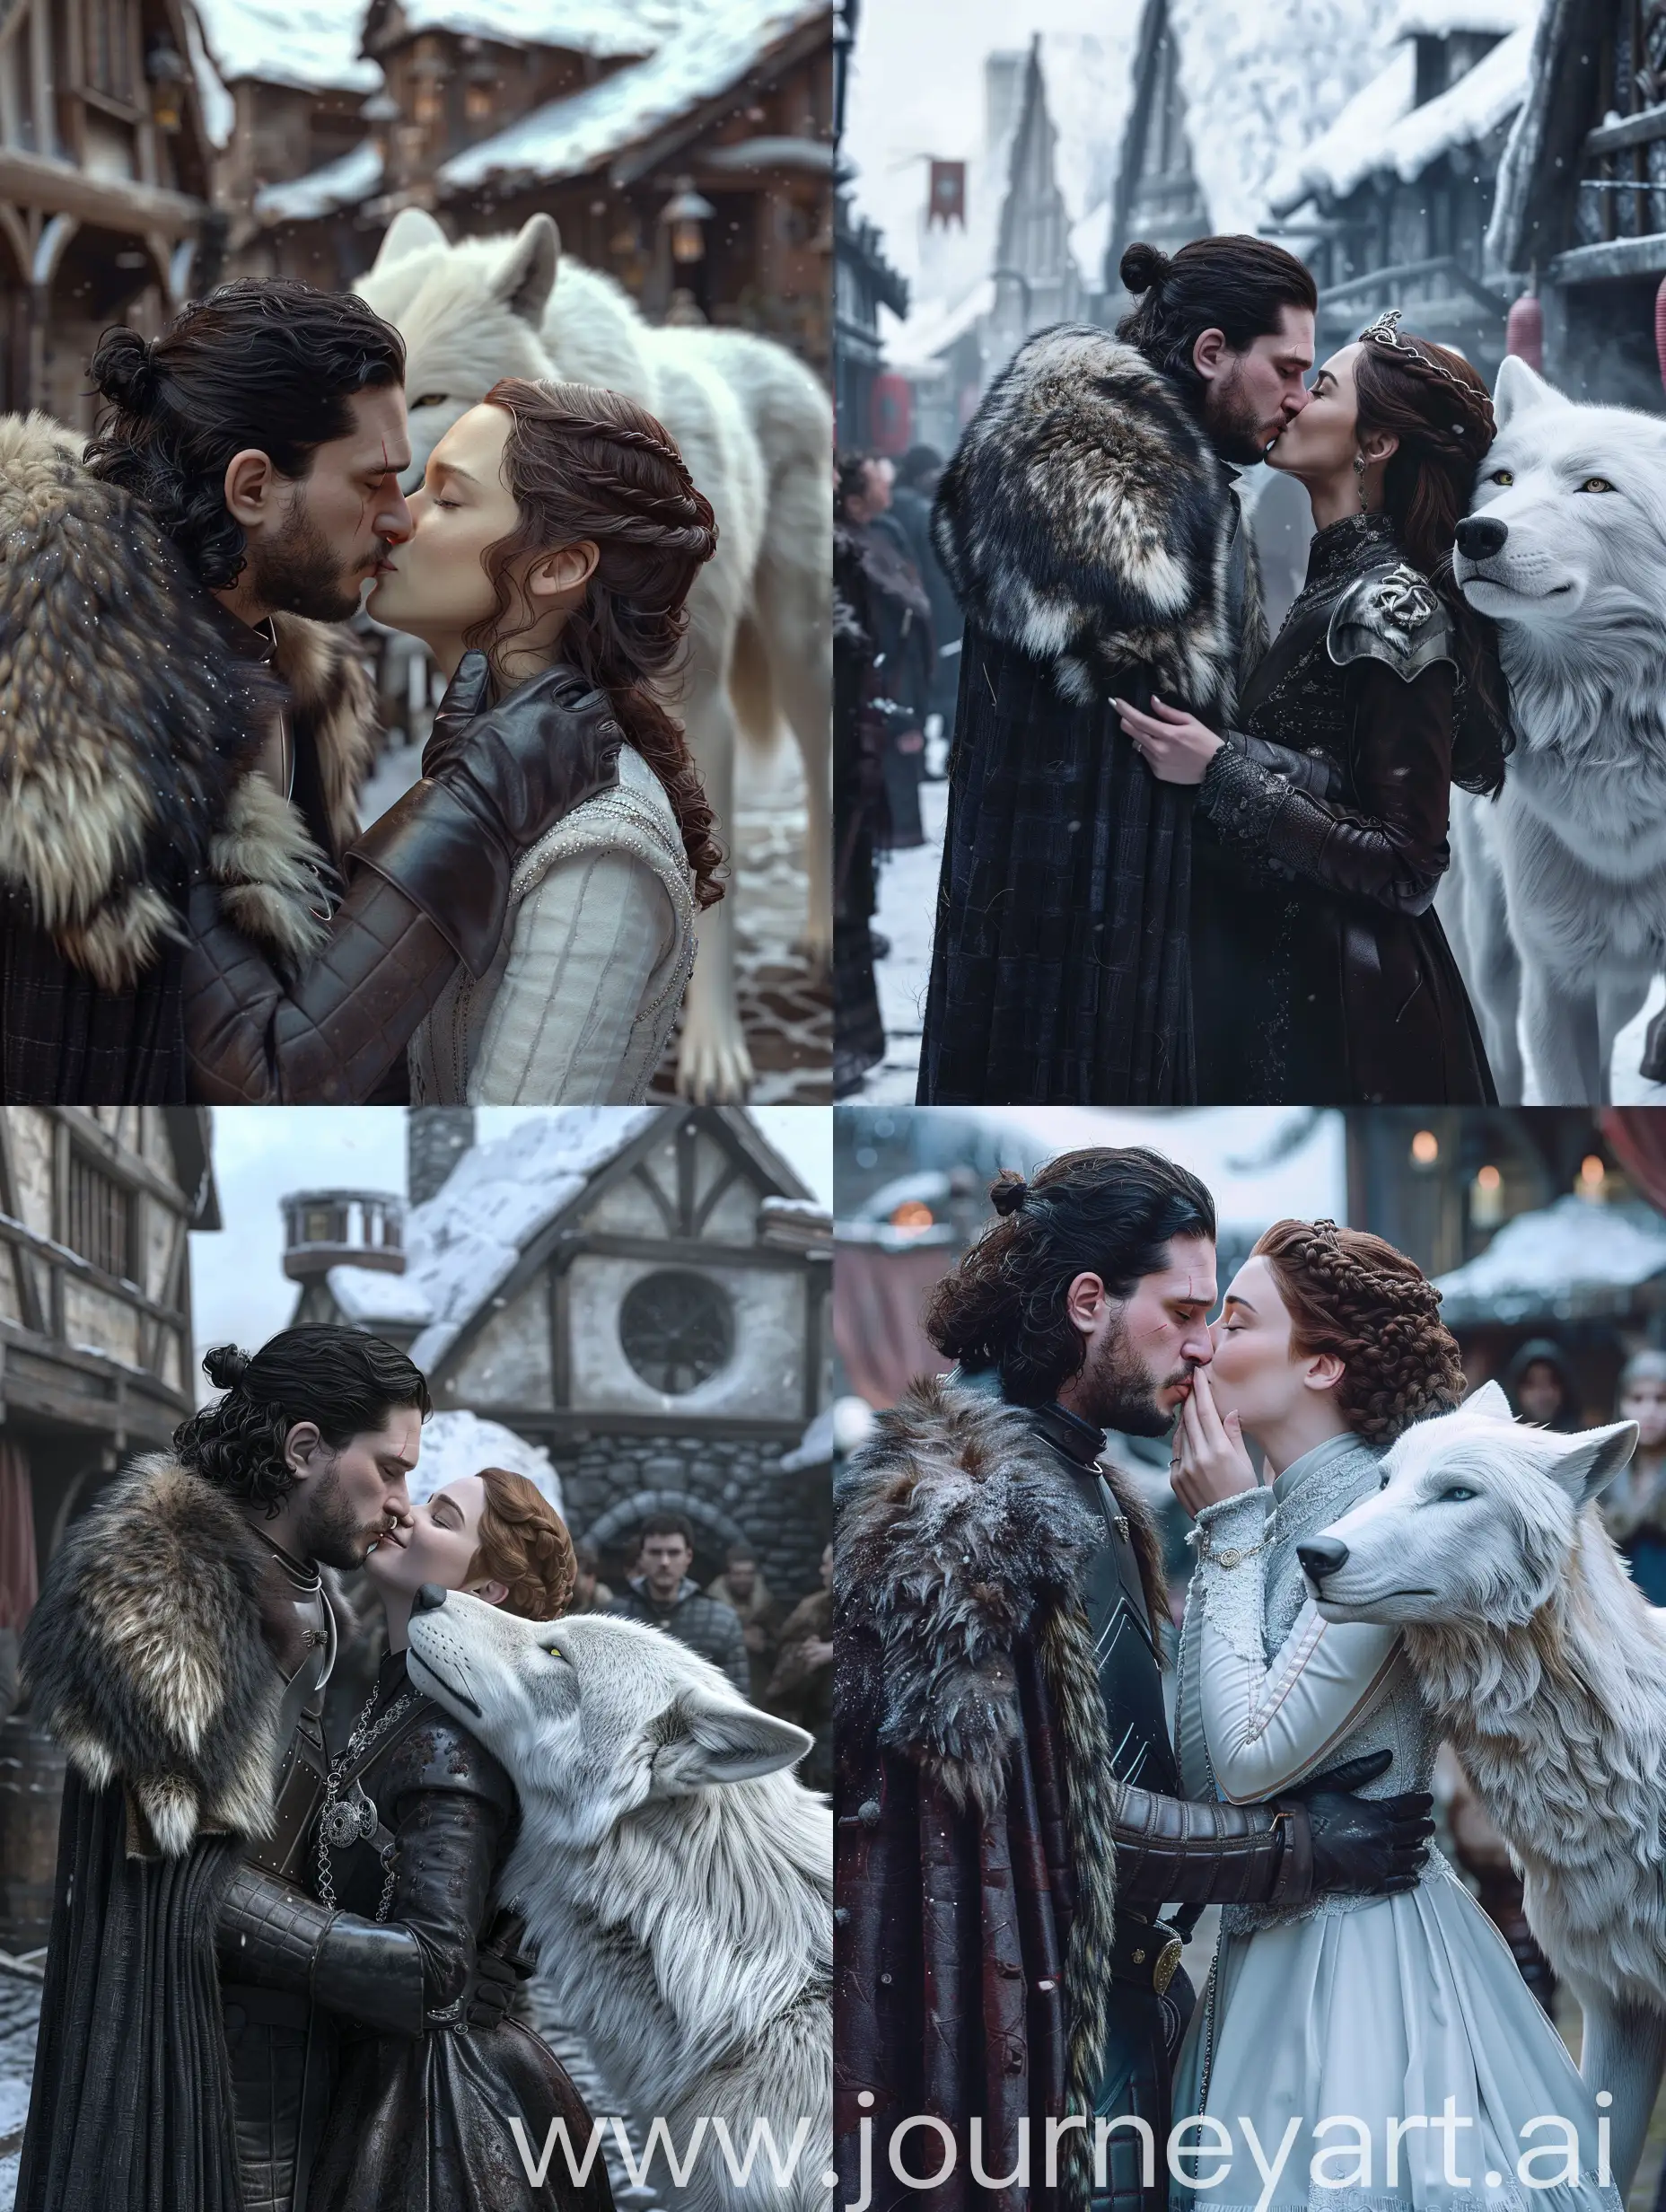 Jon-Snow-and-Margaery-Tyrell-Romantic-Kiss-in-a-Village-with-White-Direwolf-4K-3D-Photorealistic-Scene